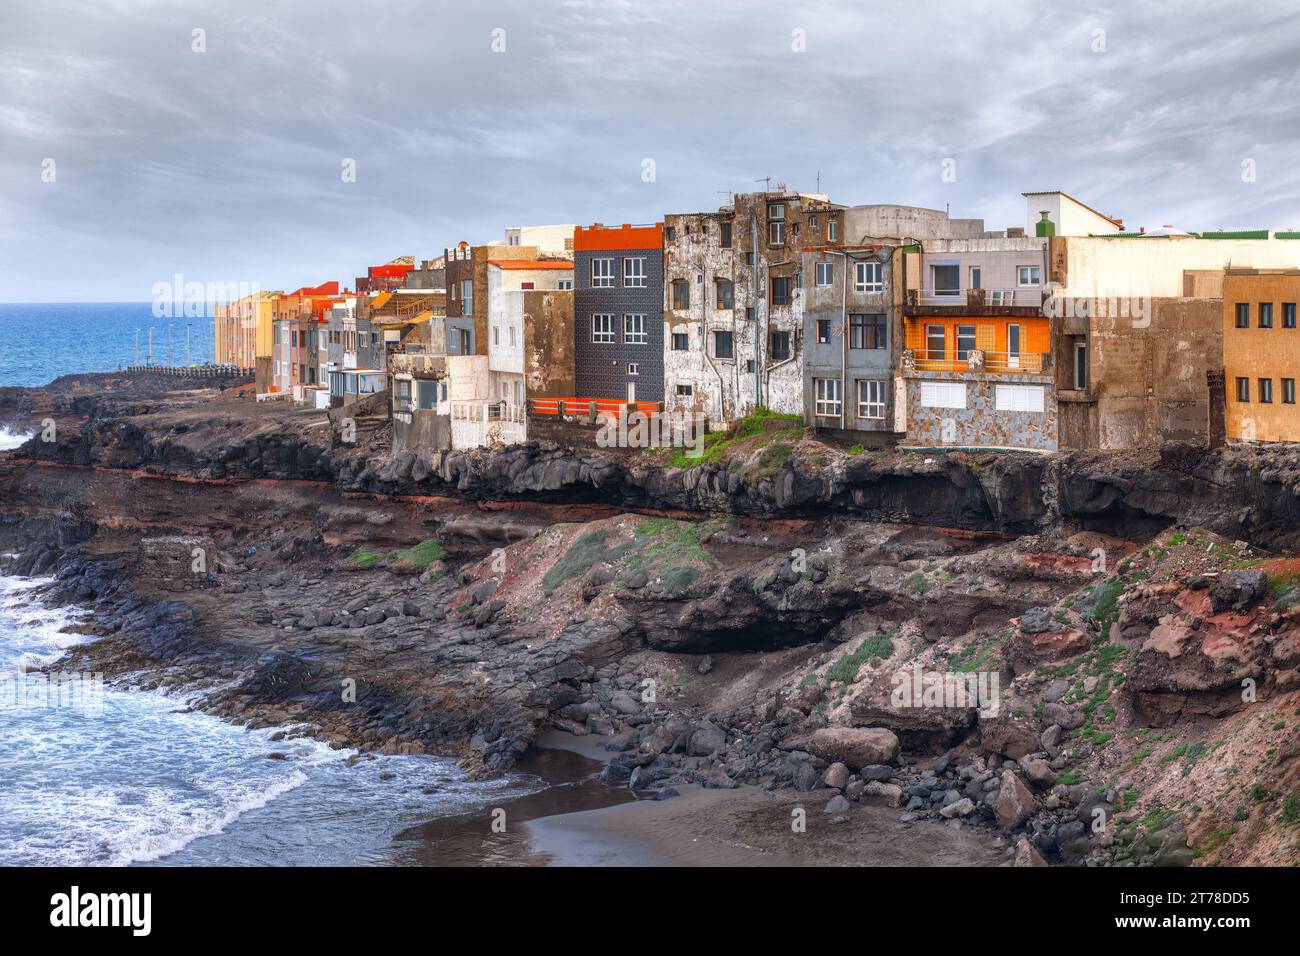 A row of houses is perched along the edge of an ocean landslide coast . Colorful houses on the coast of Gran Canaria, Canary Islands, Spain Stock Photo